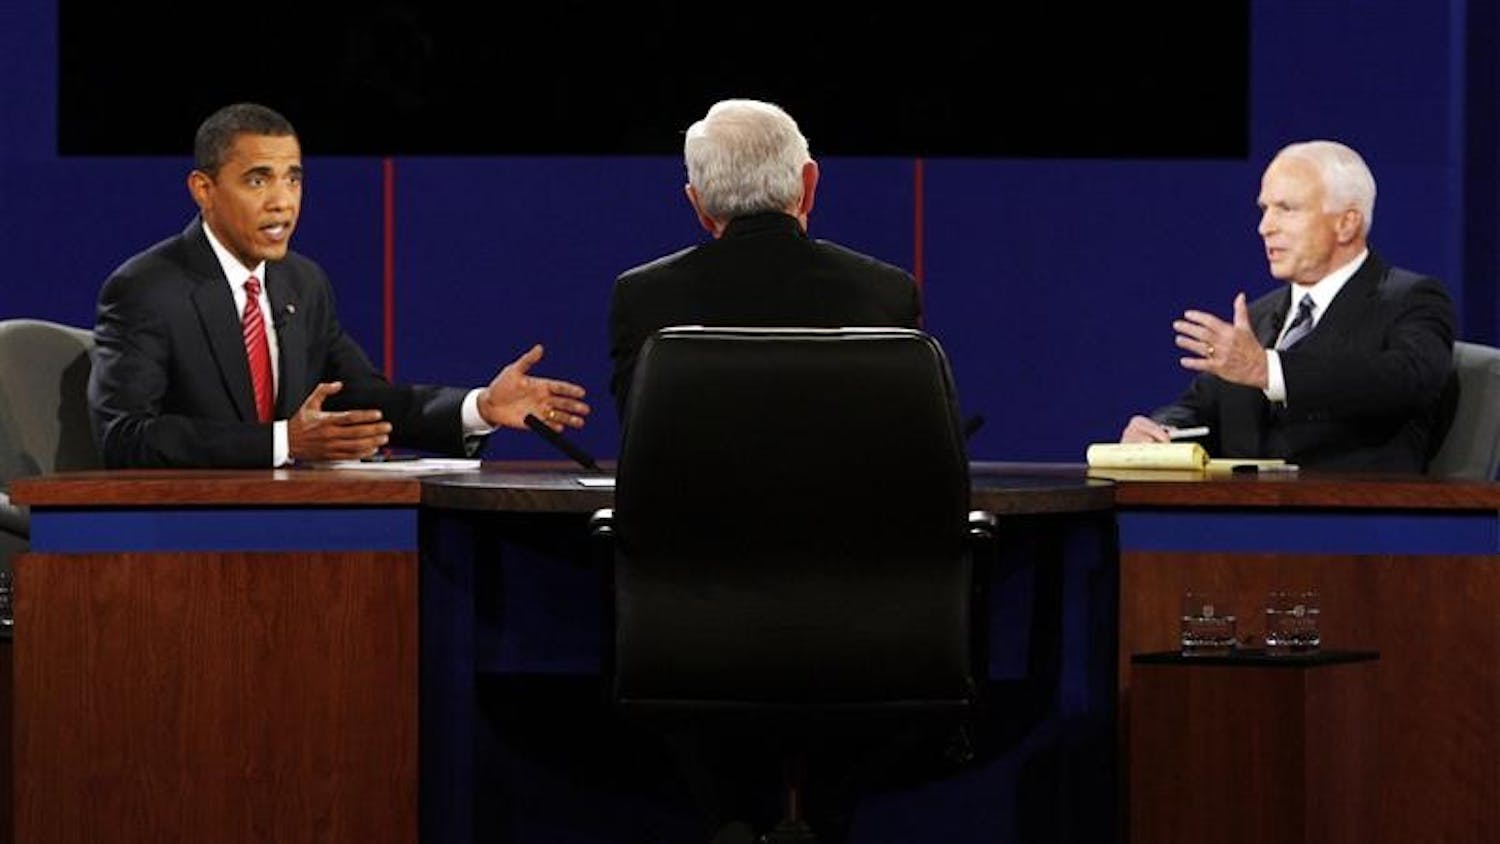 Democratic presidential candidate Sen. Barack Obama, D-Ill., and Republican presidential candidate Sen. John McCain, R-Ariz., trade responses during a presidential debate on Wednesday at Hofstra University in Hempstead, N.Y.